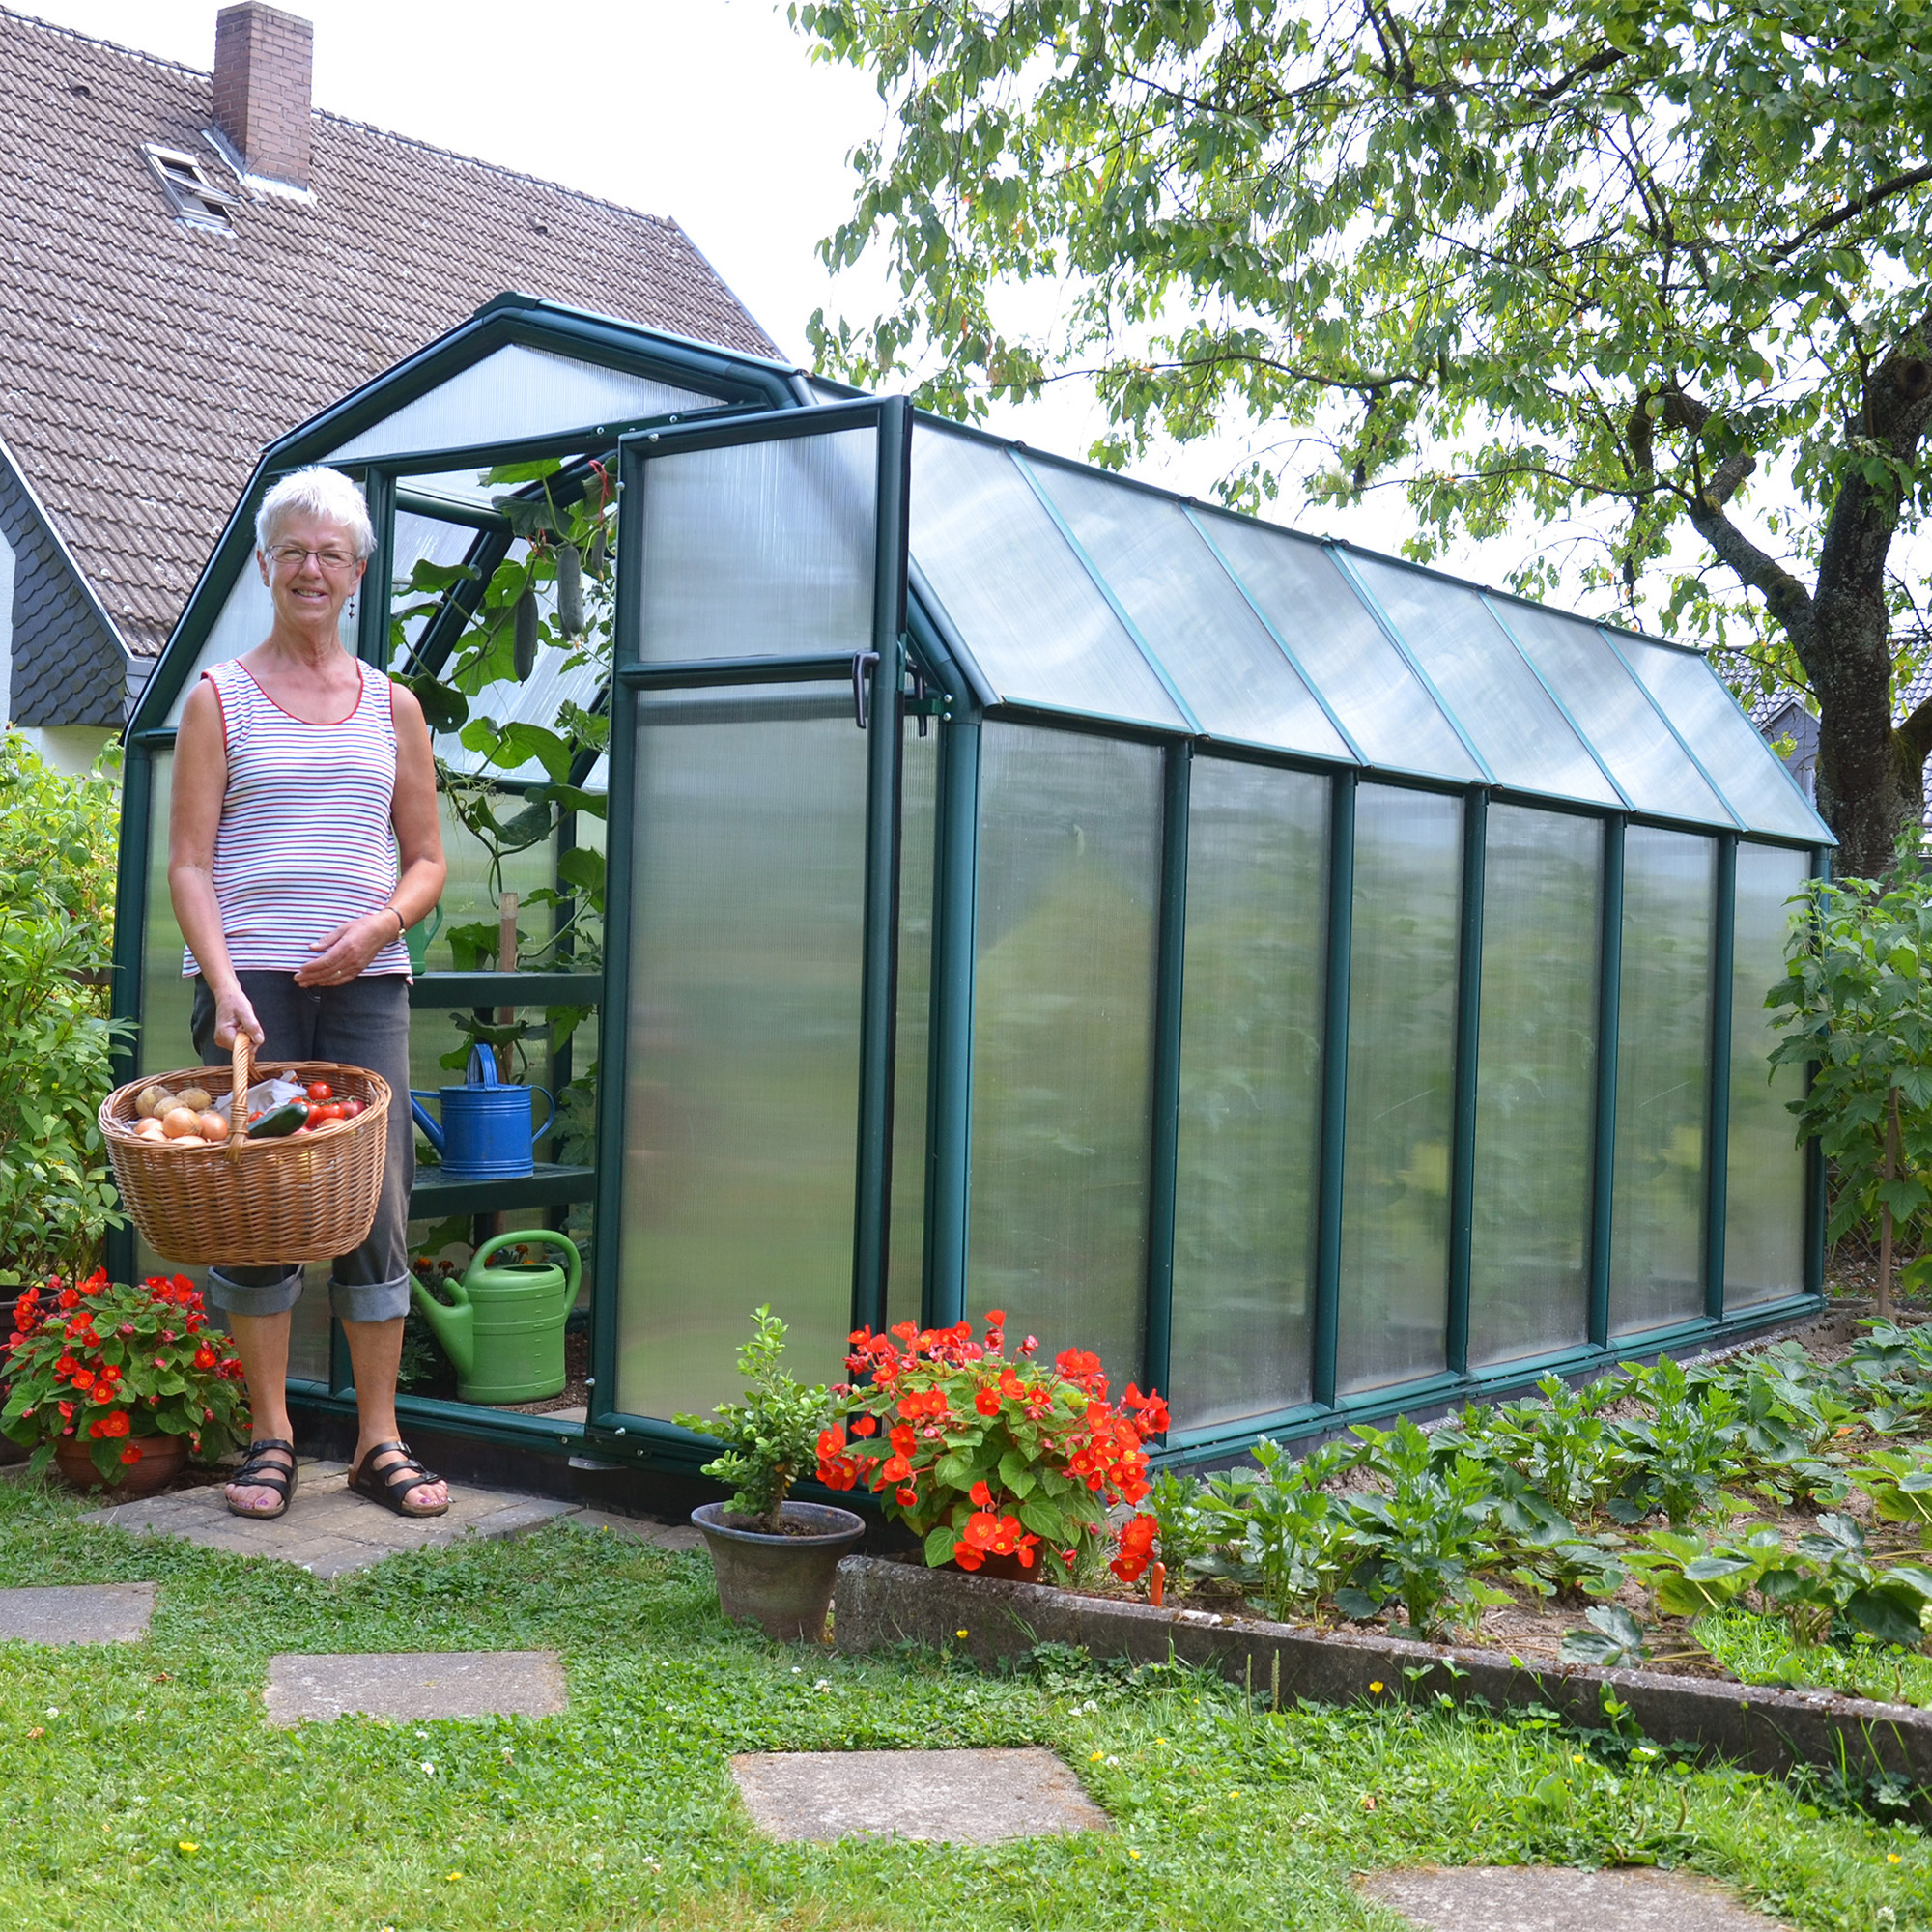 Photos - Greenhouses Canopia 6'x12' Palram  Rion EcoGrow Large Green Polycarbonate Greenhouse (1 